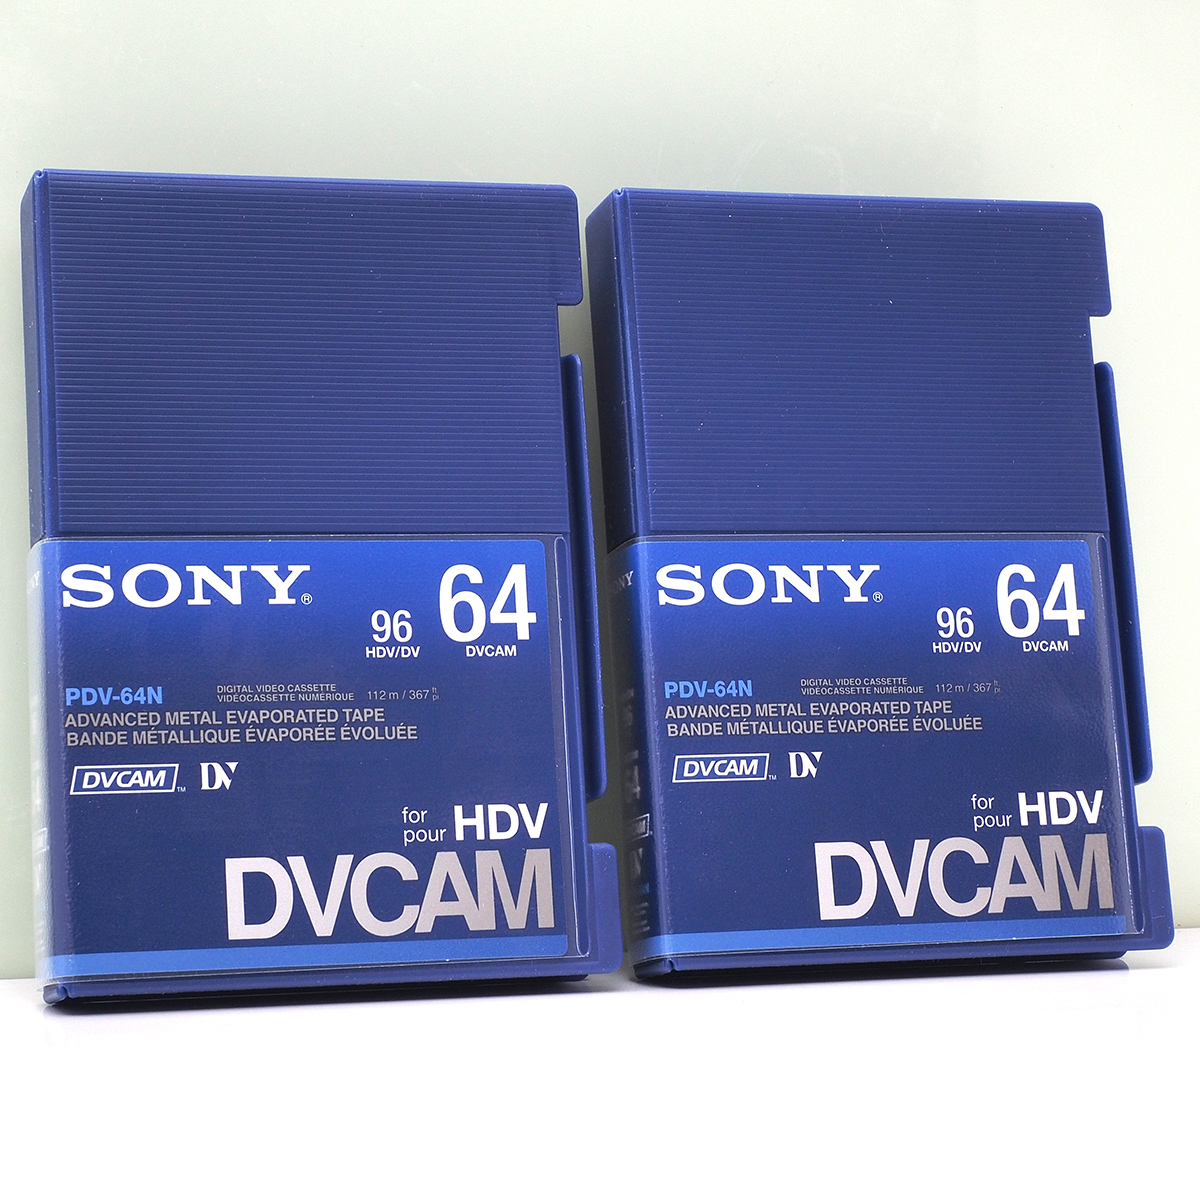  2 ps SONY PDV-64N standard DVCAM tape 64 minute business use tape unused 2 ps together set Sony HDV DV DVCAM